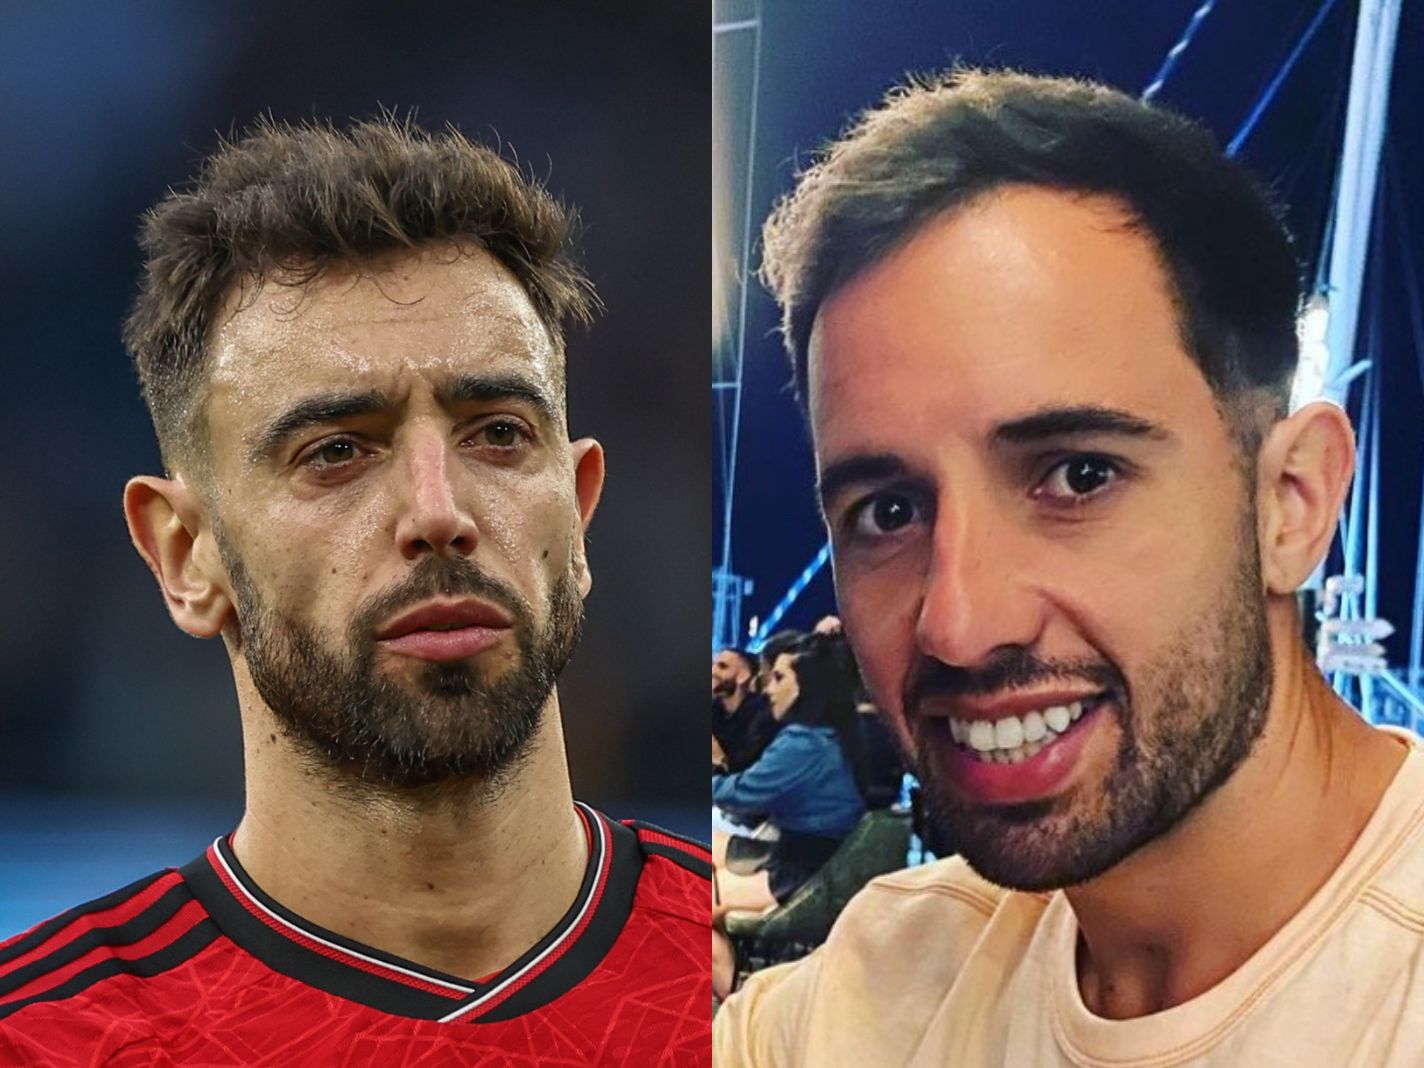 Get to Know Bruno Fernandes’ Brother Ricardo, An NHS Hero and Non-League Football Star